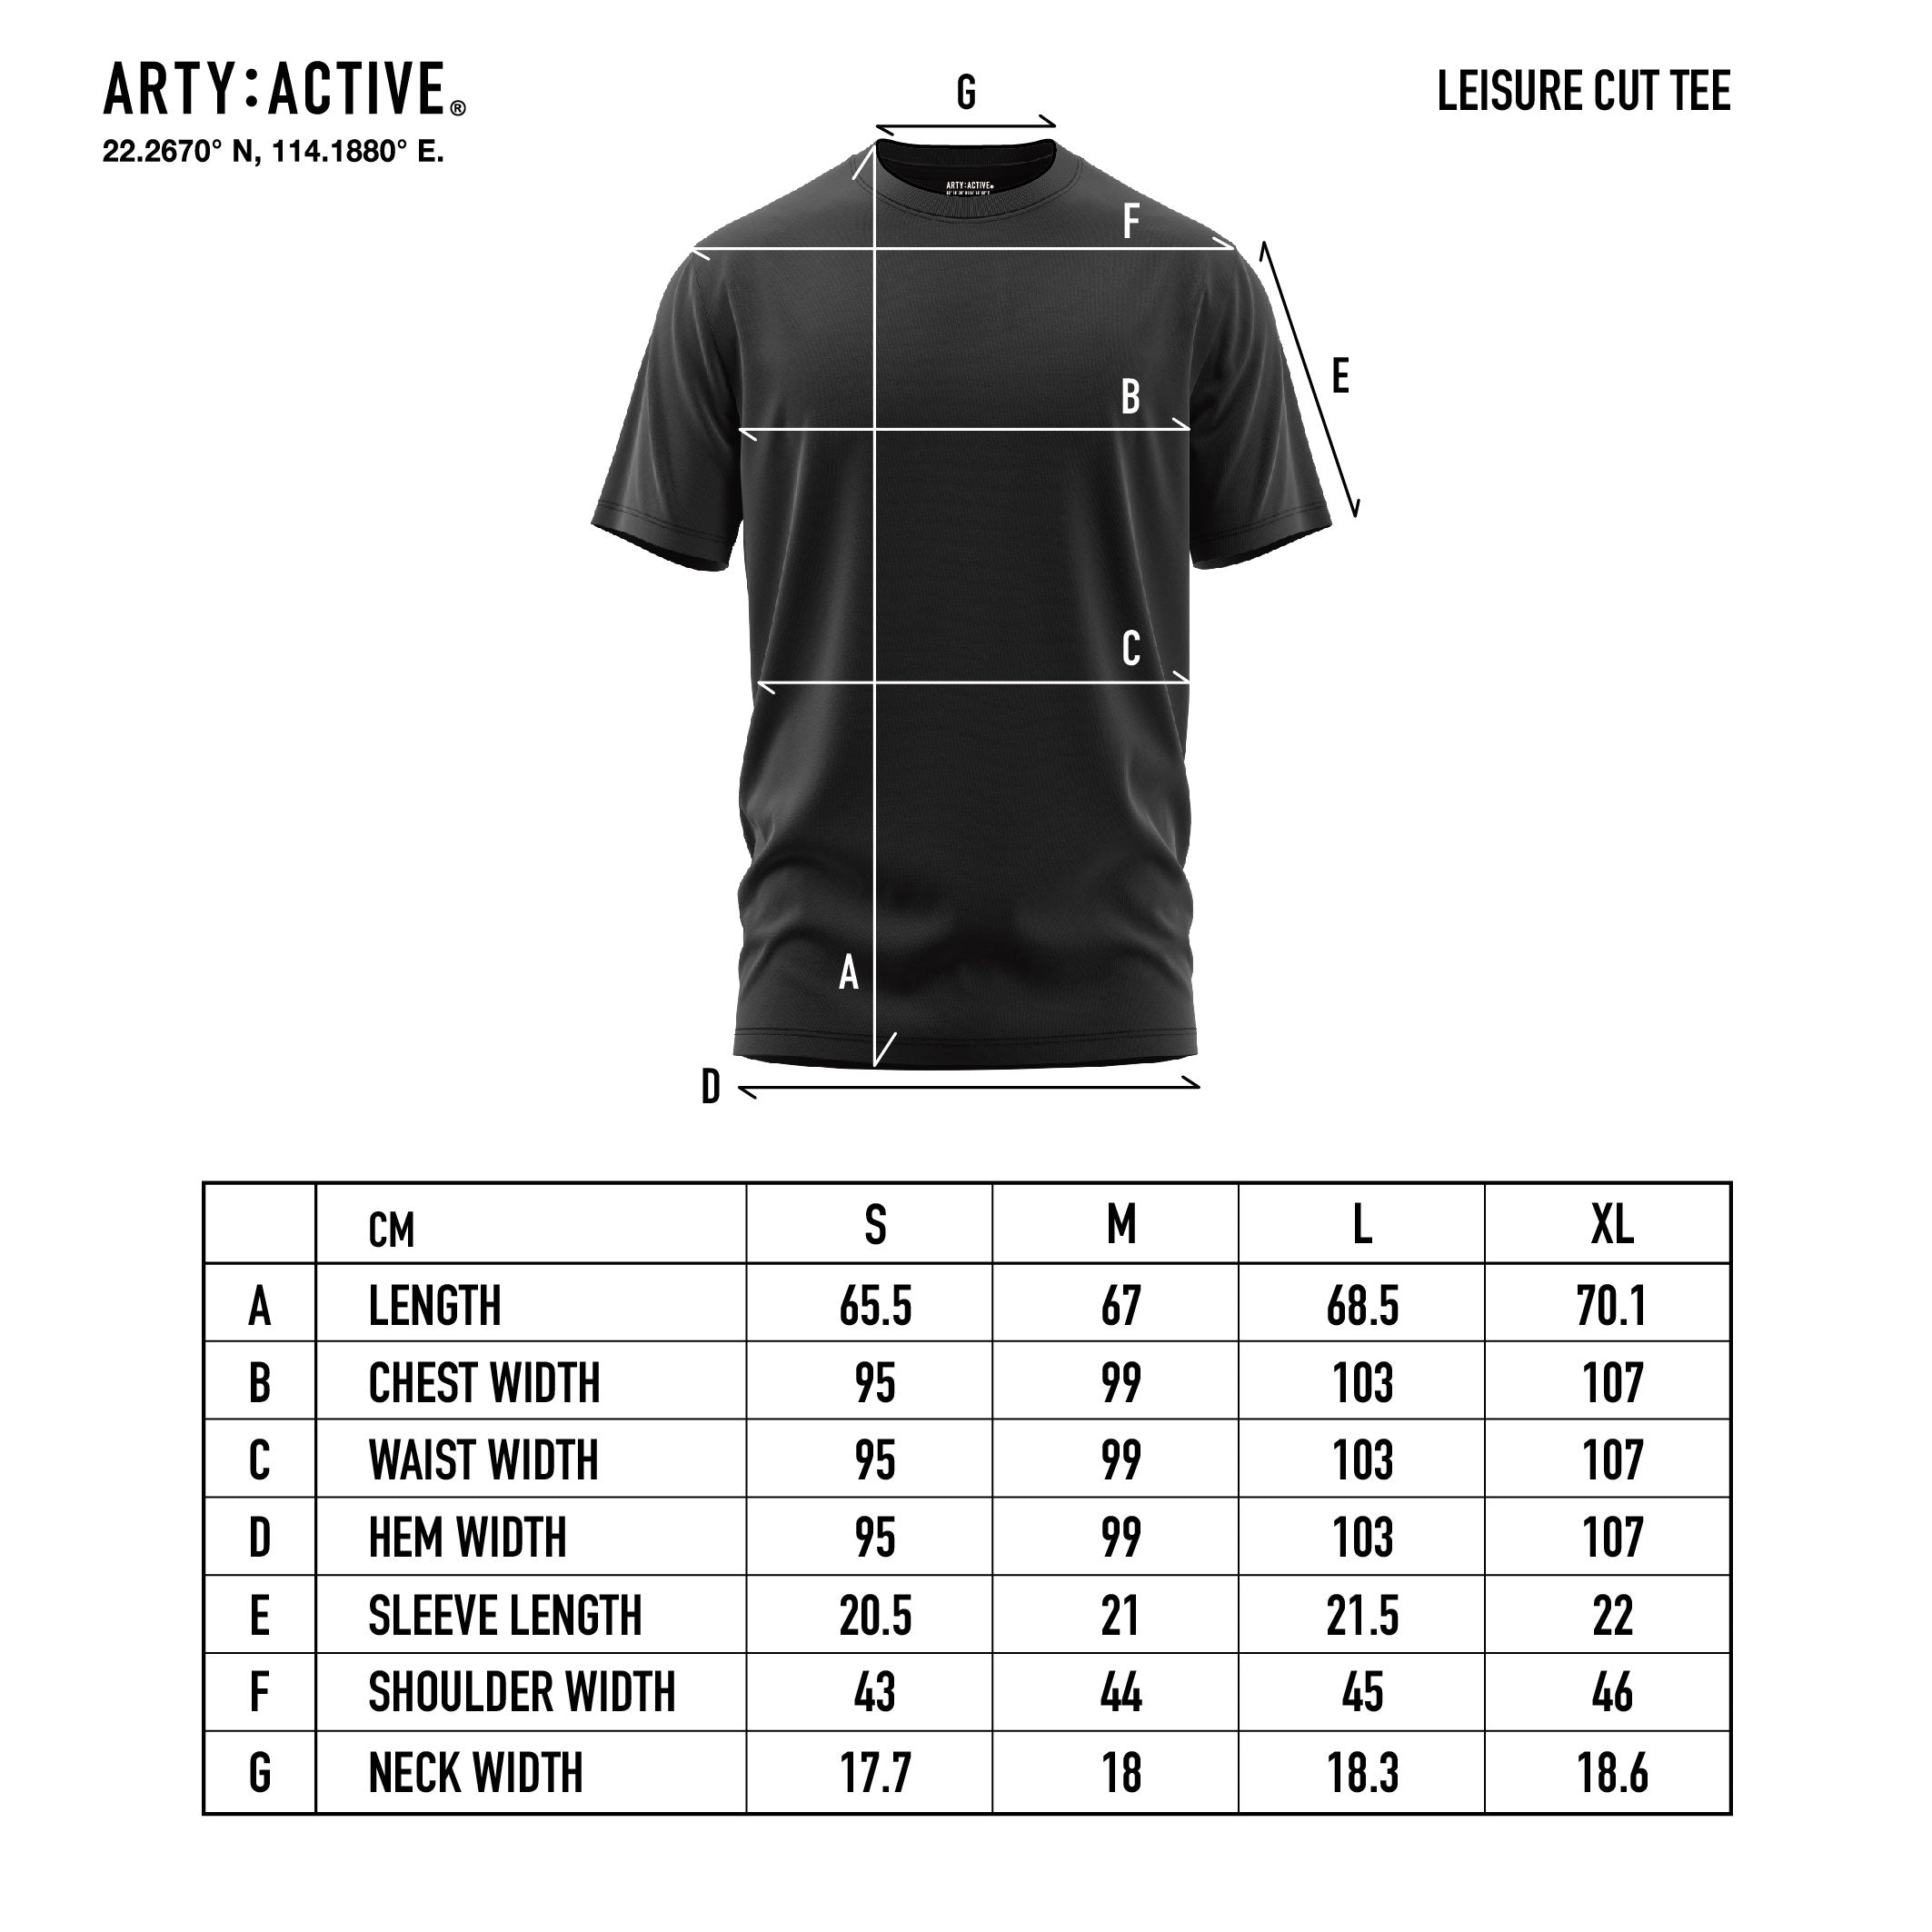 SPORTS T-SHIRT TOP SIZE CHART – ARTY:ACTIVE